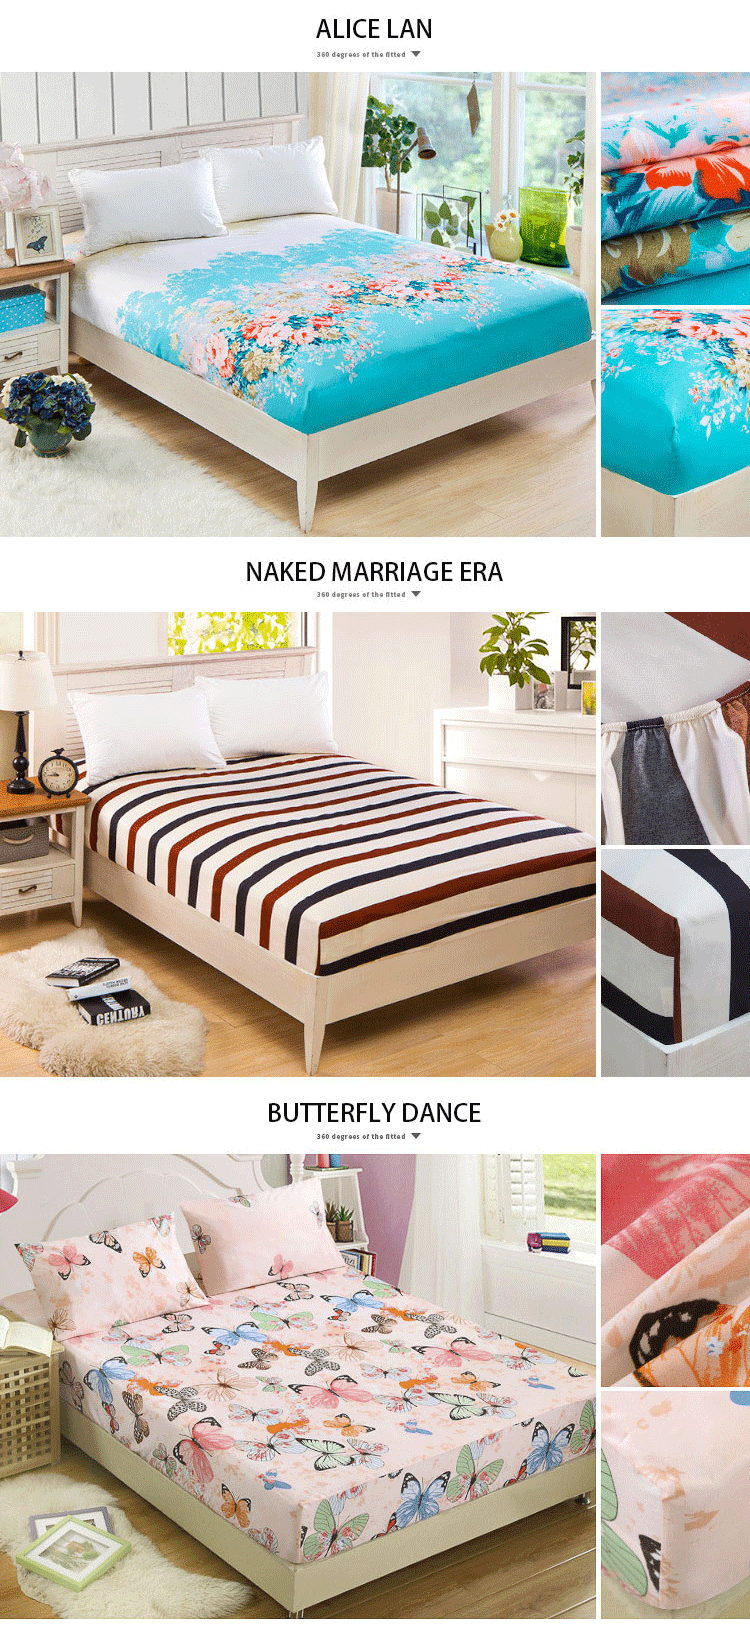 Home Textile Single Piece Bed Cover Mattress Protection Cover Cartoon Bed Cover 1.2m1.5m1.8m Anti-skid And Dustproof Bedsheet